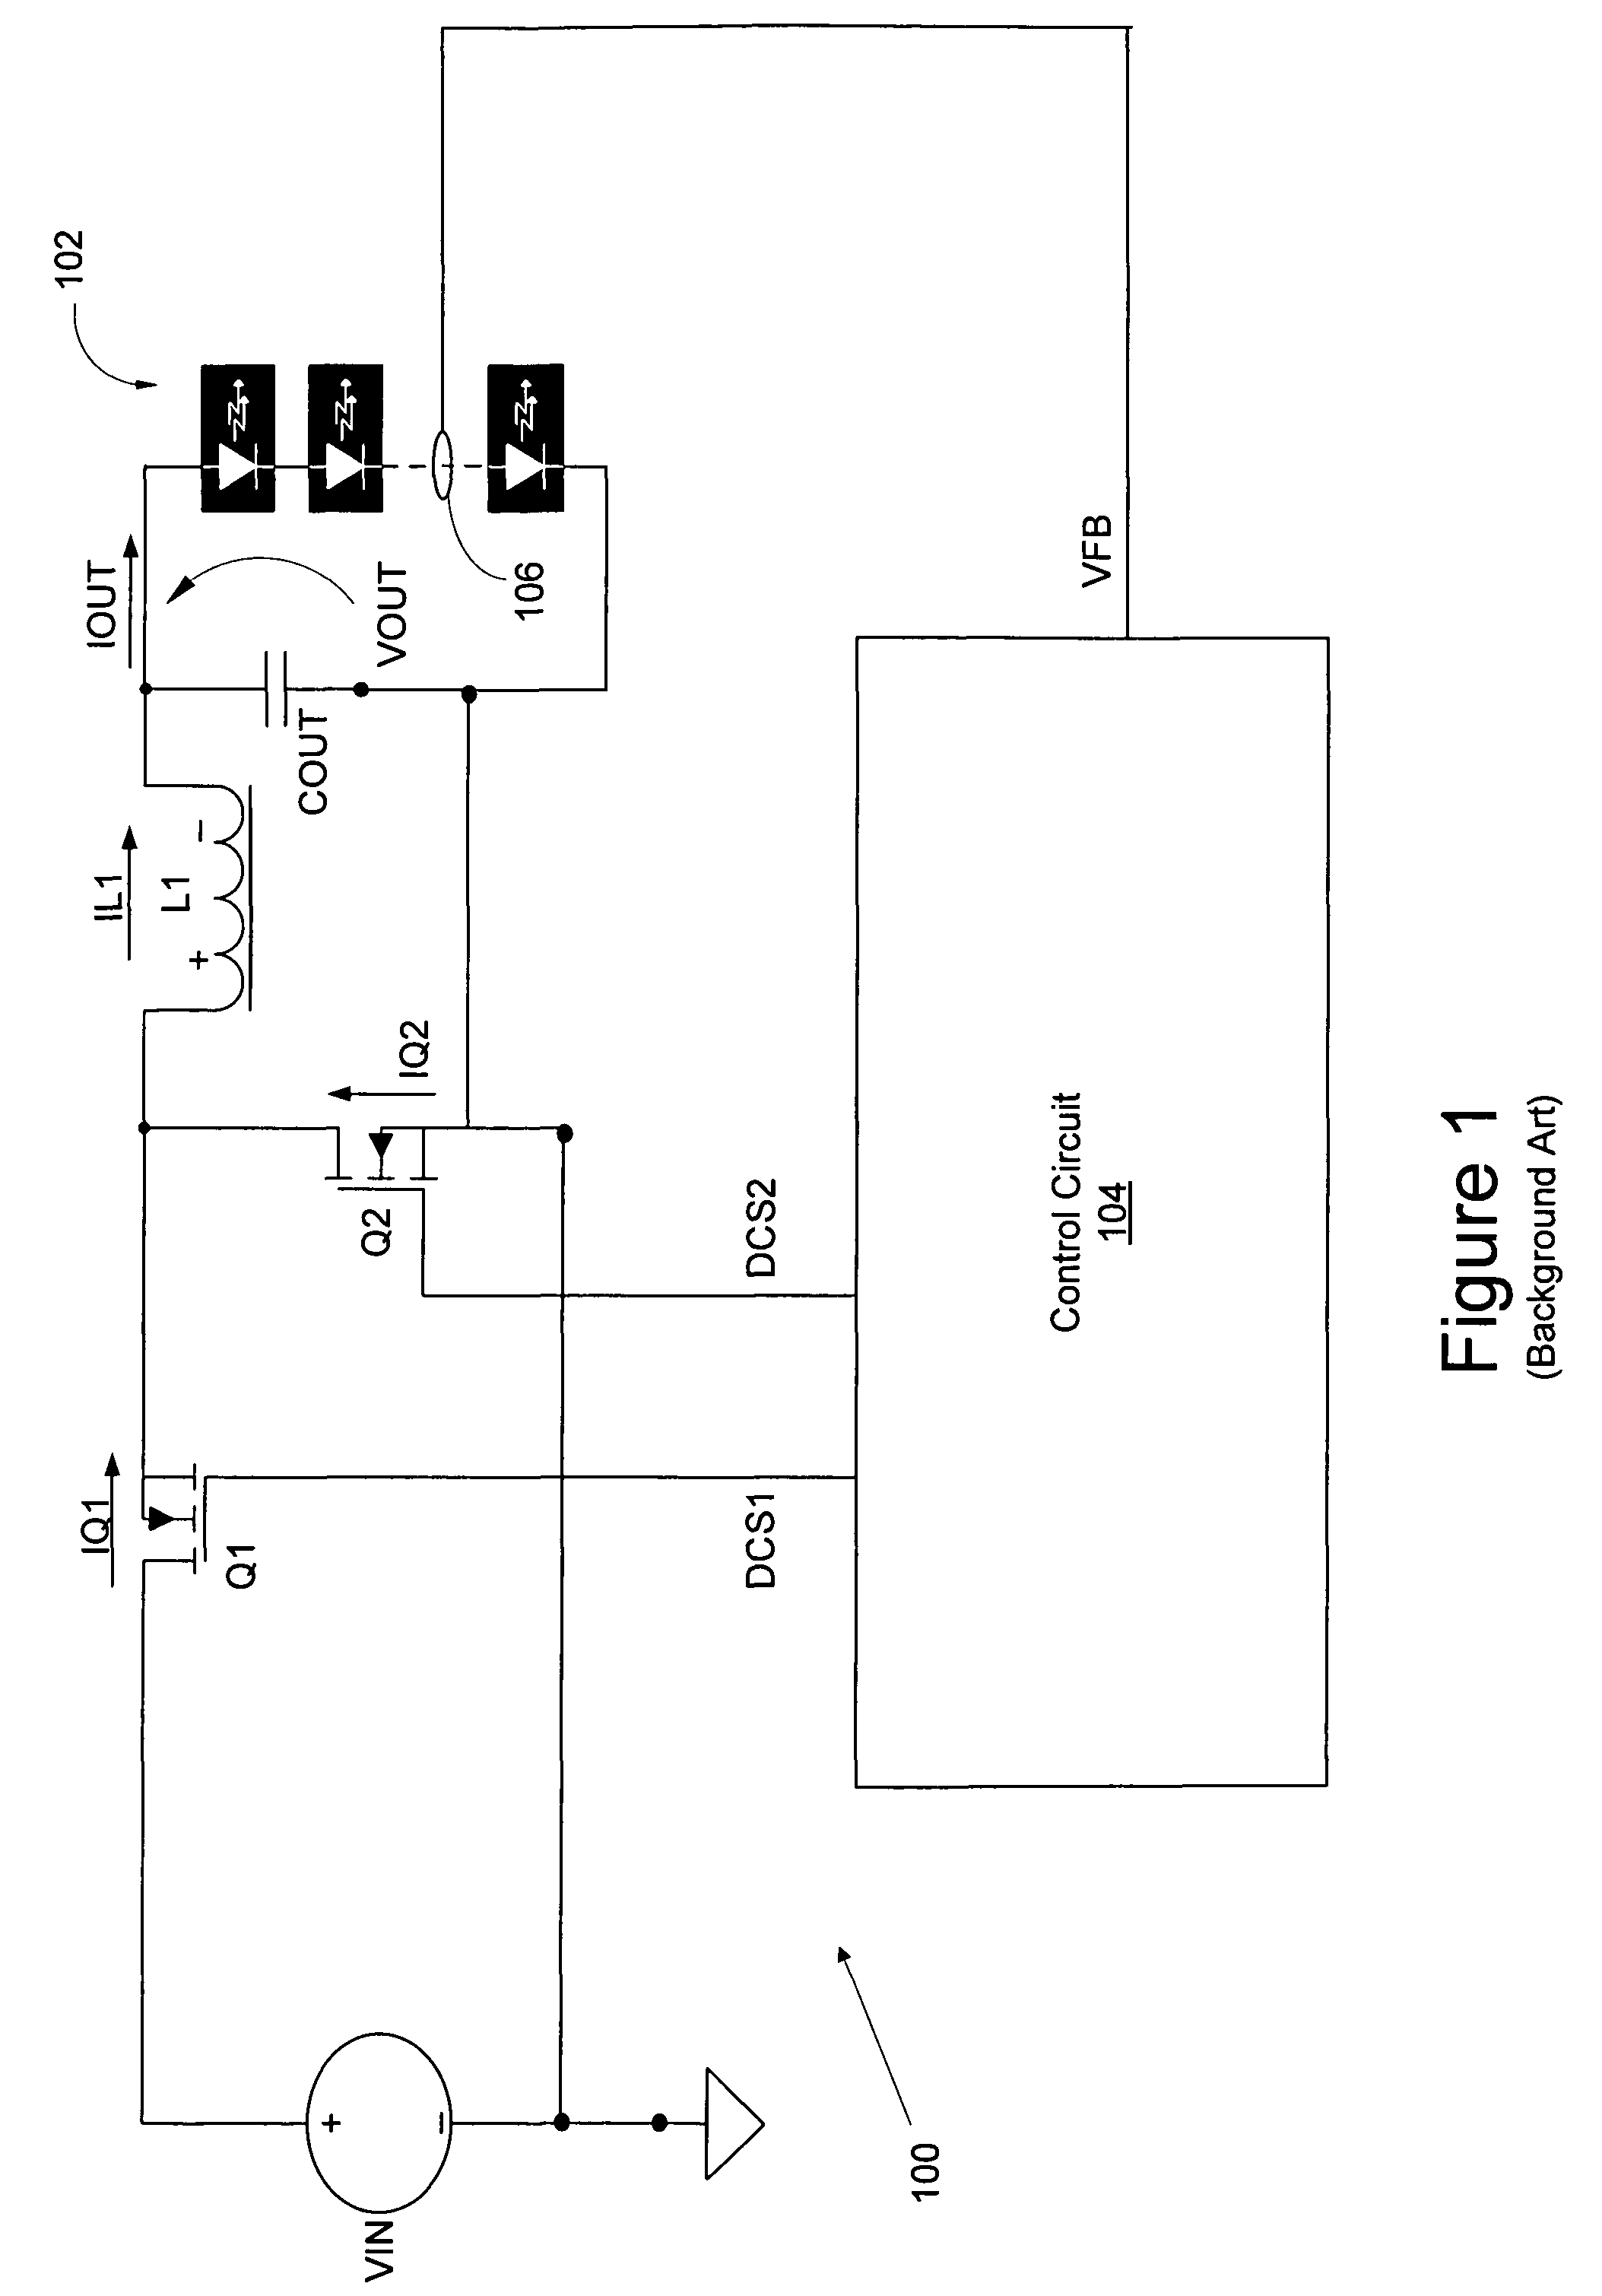 Constant current light emitting diode (LED) driver circuit and method